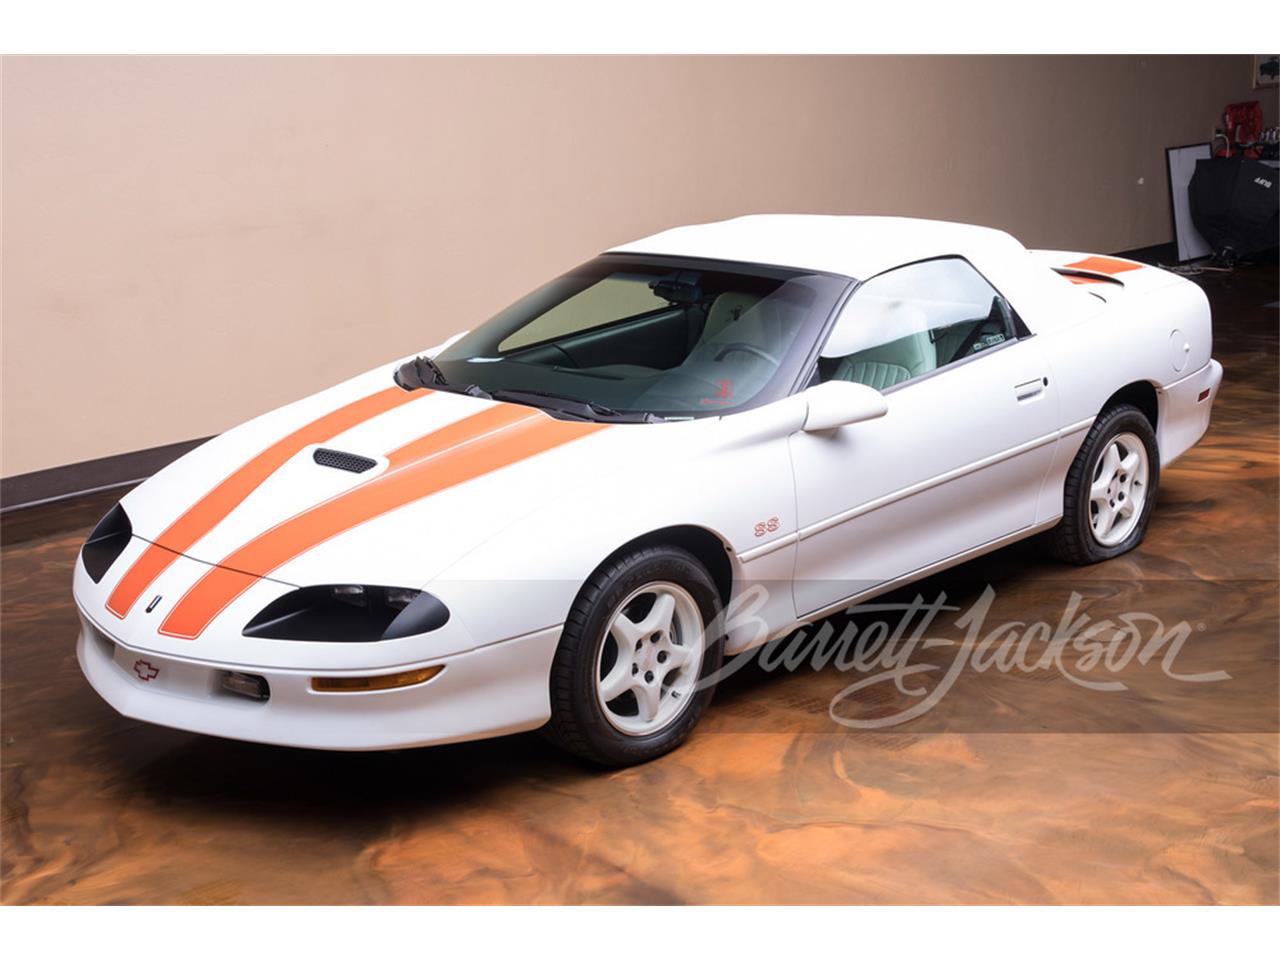 For Sale at Auction: 1997 Chevrolet Camaro Z28 in Scottsdale, Arizona for sale in Scottsdale, AZ